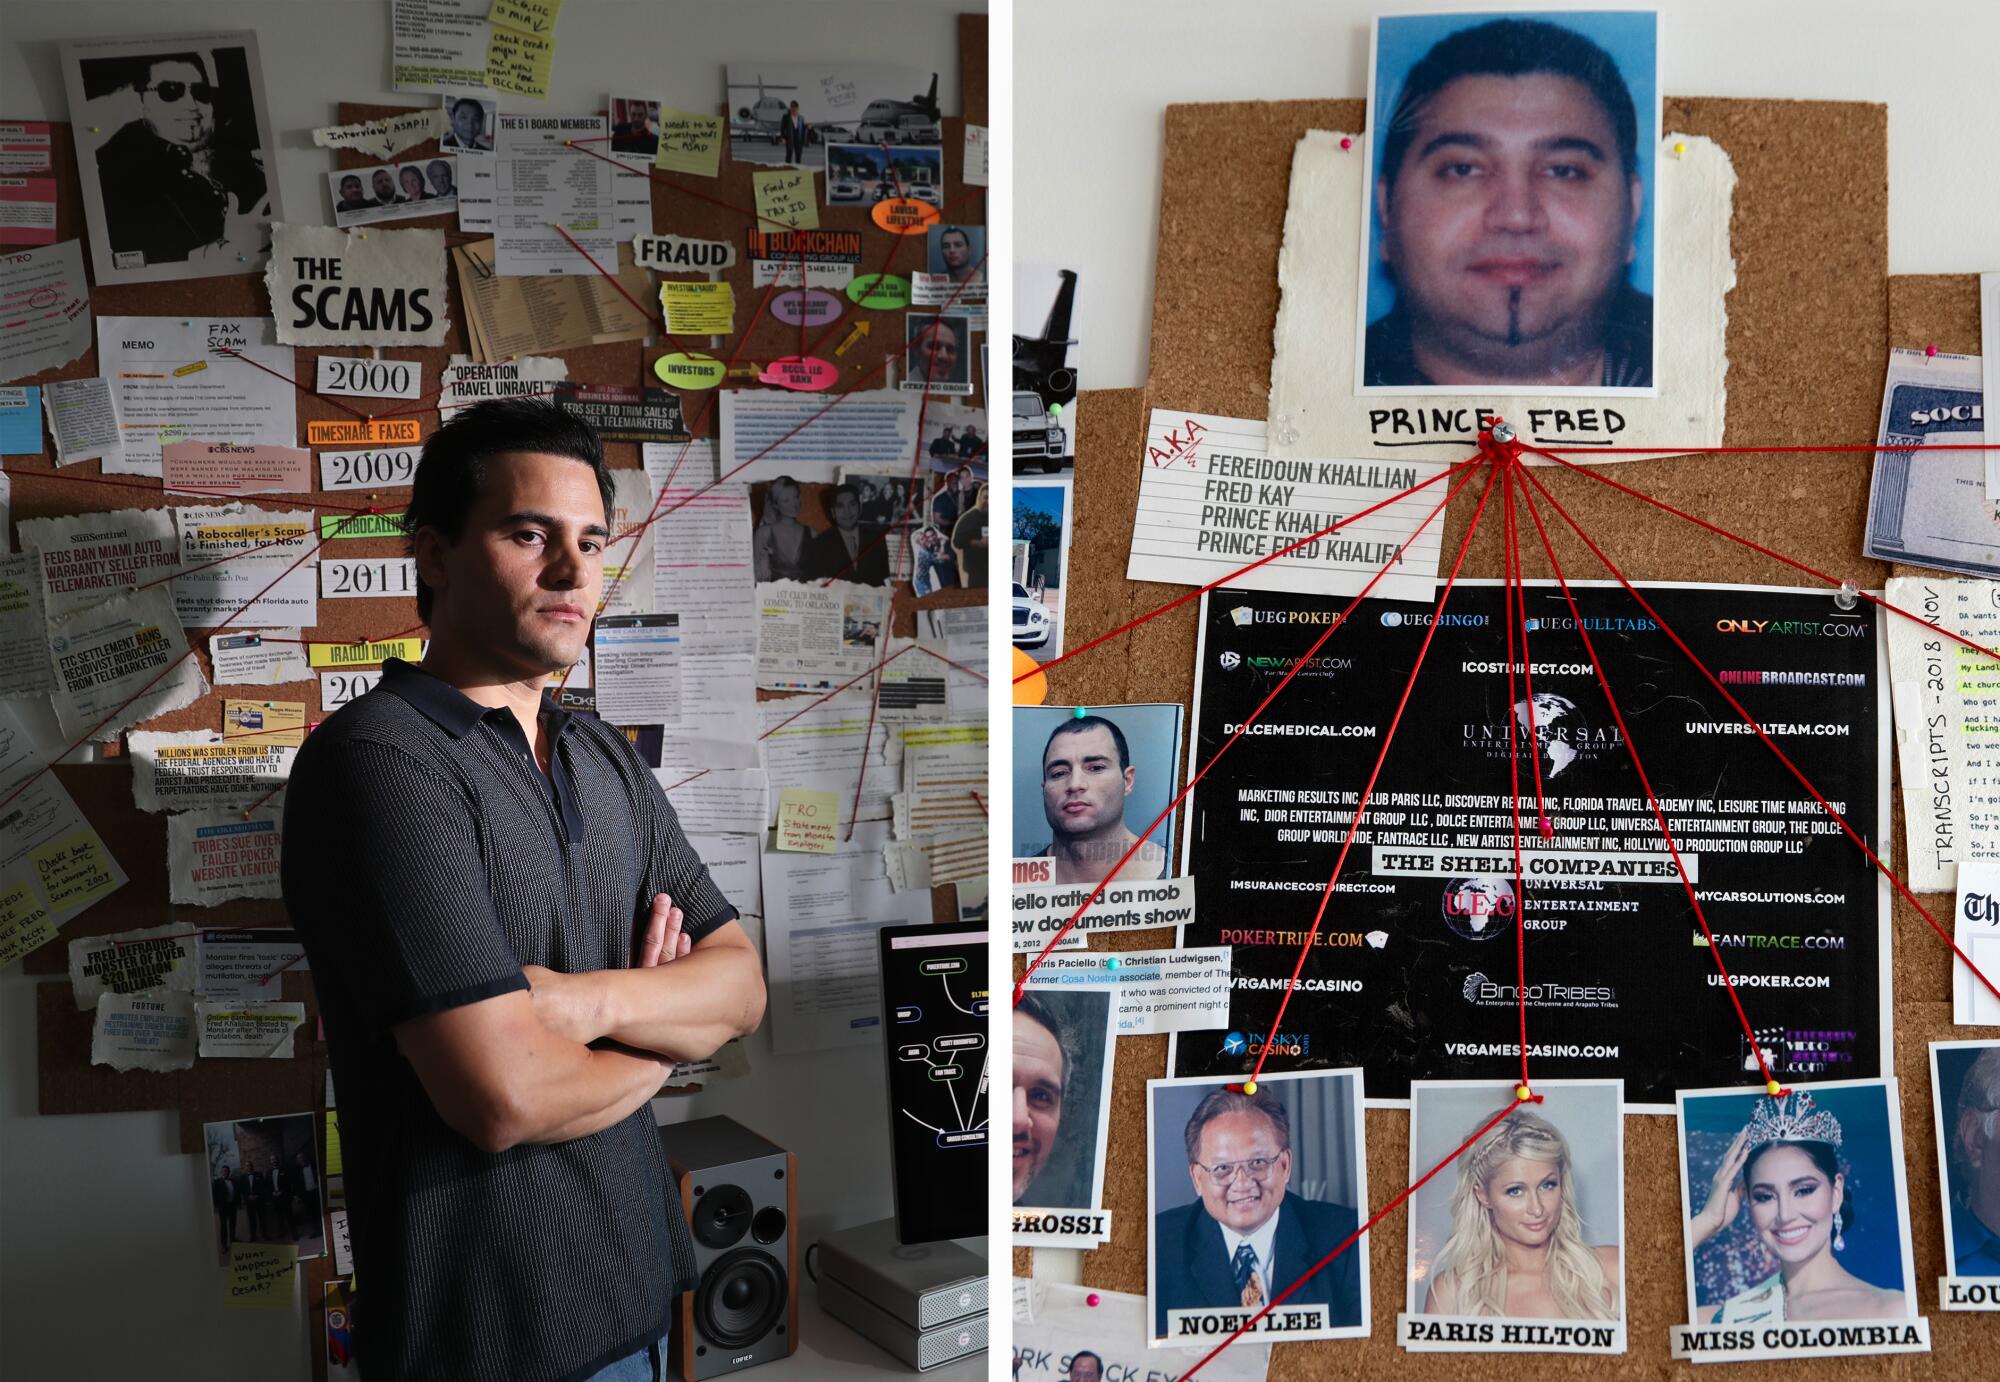 A split of two images: at left a man crosses his arms while standing near a corkboard and a detail of it with clippings